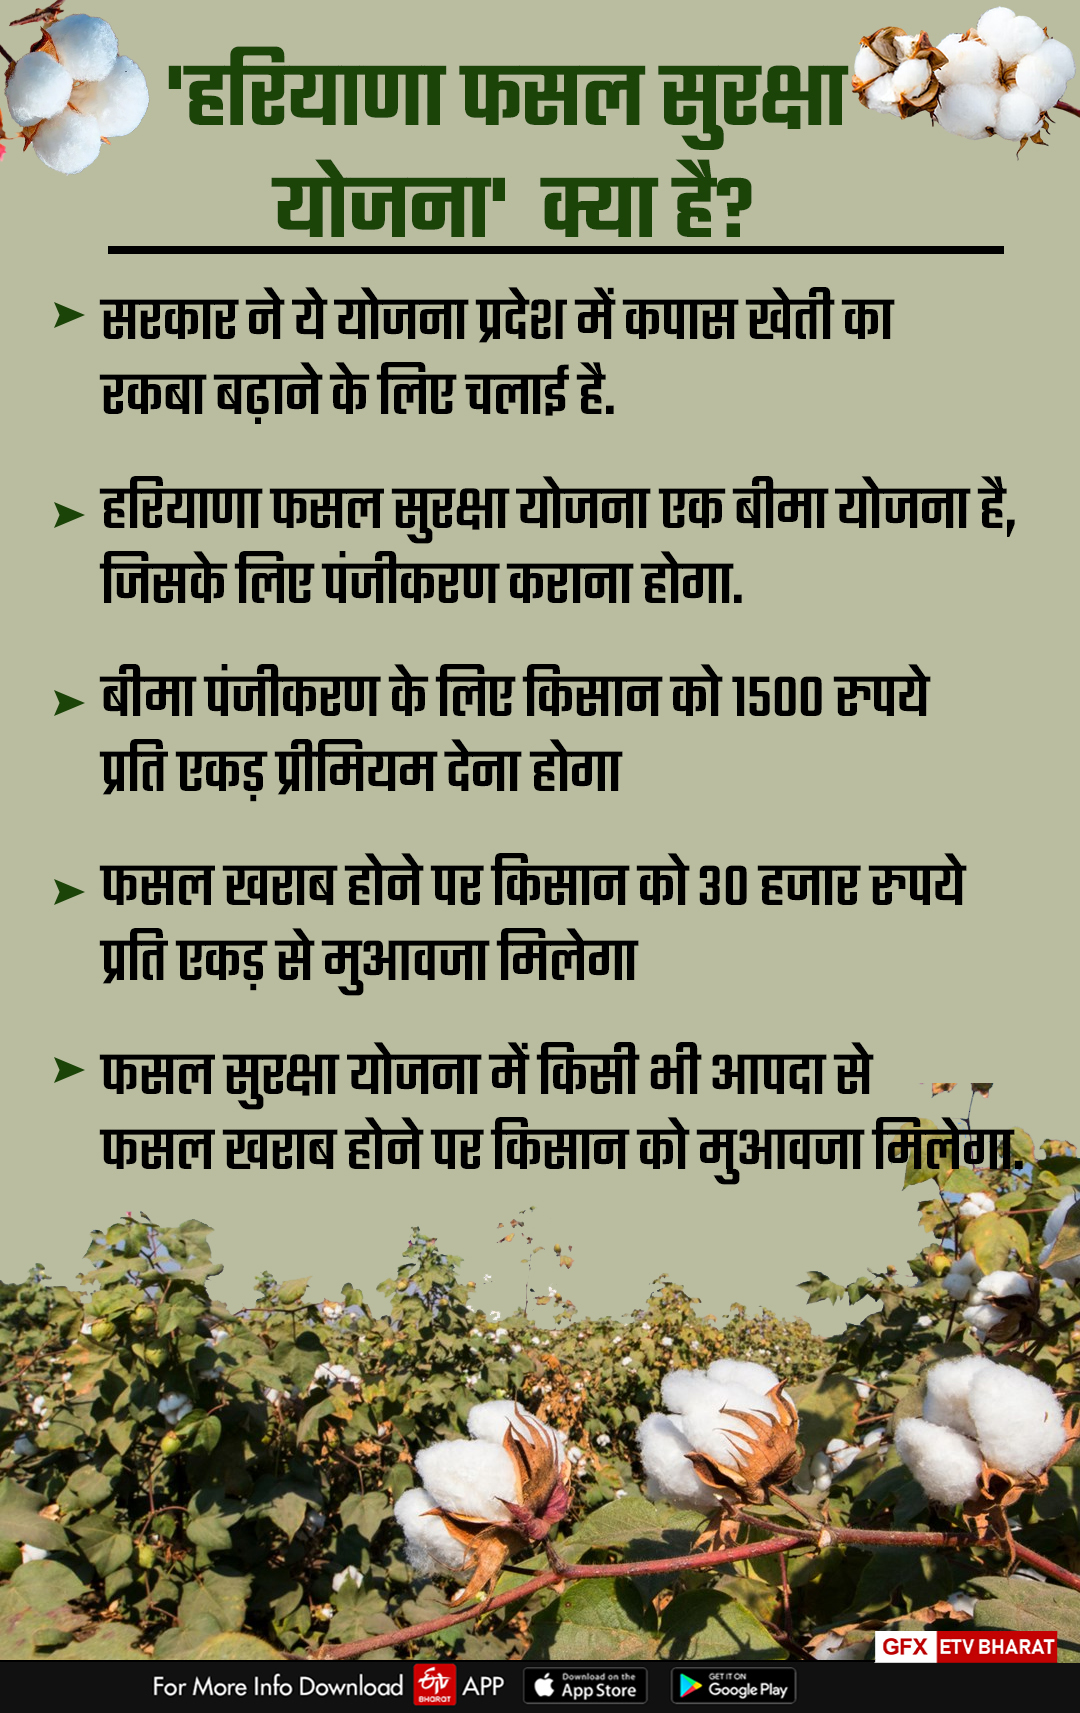 What is Haryana Crop Protection Scheme